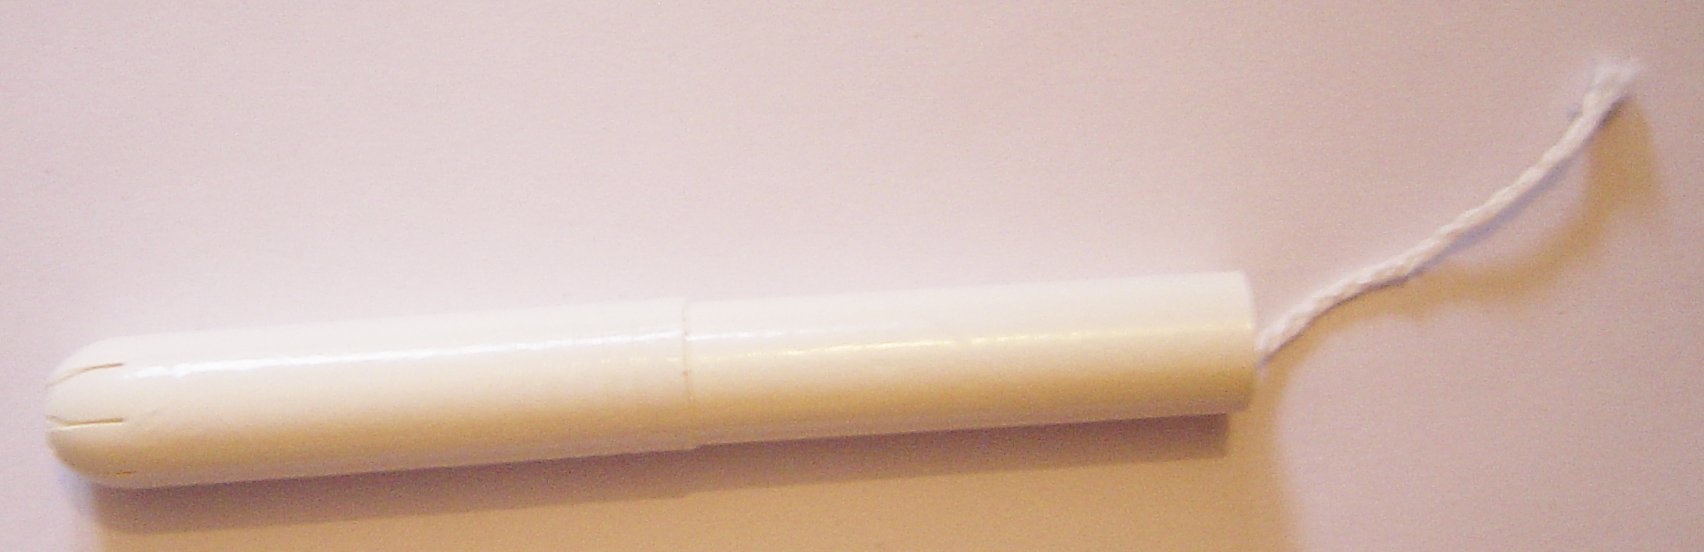 http://upload.wikimedia.org/wikipedia/commons/7/7a/Tampon_with_applicator.jpg